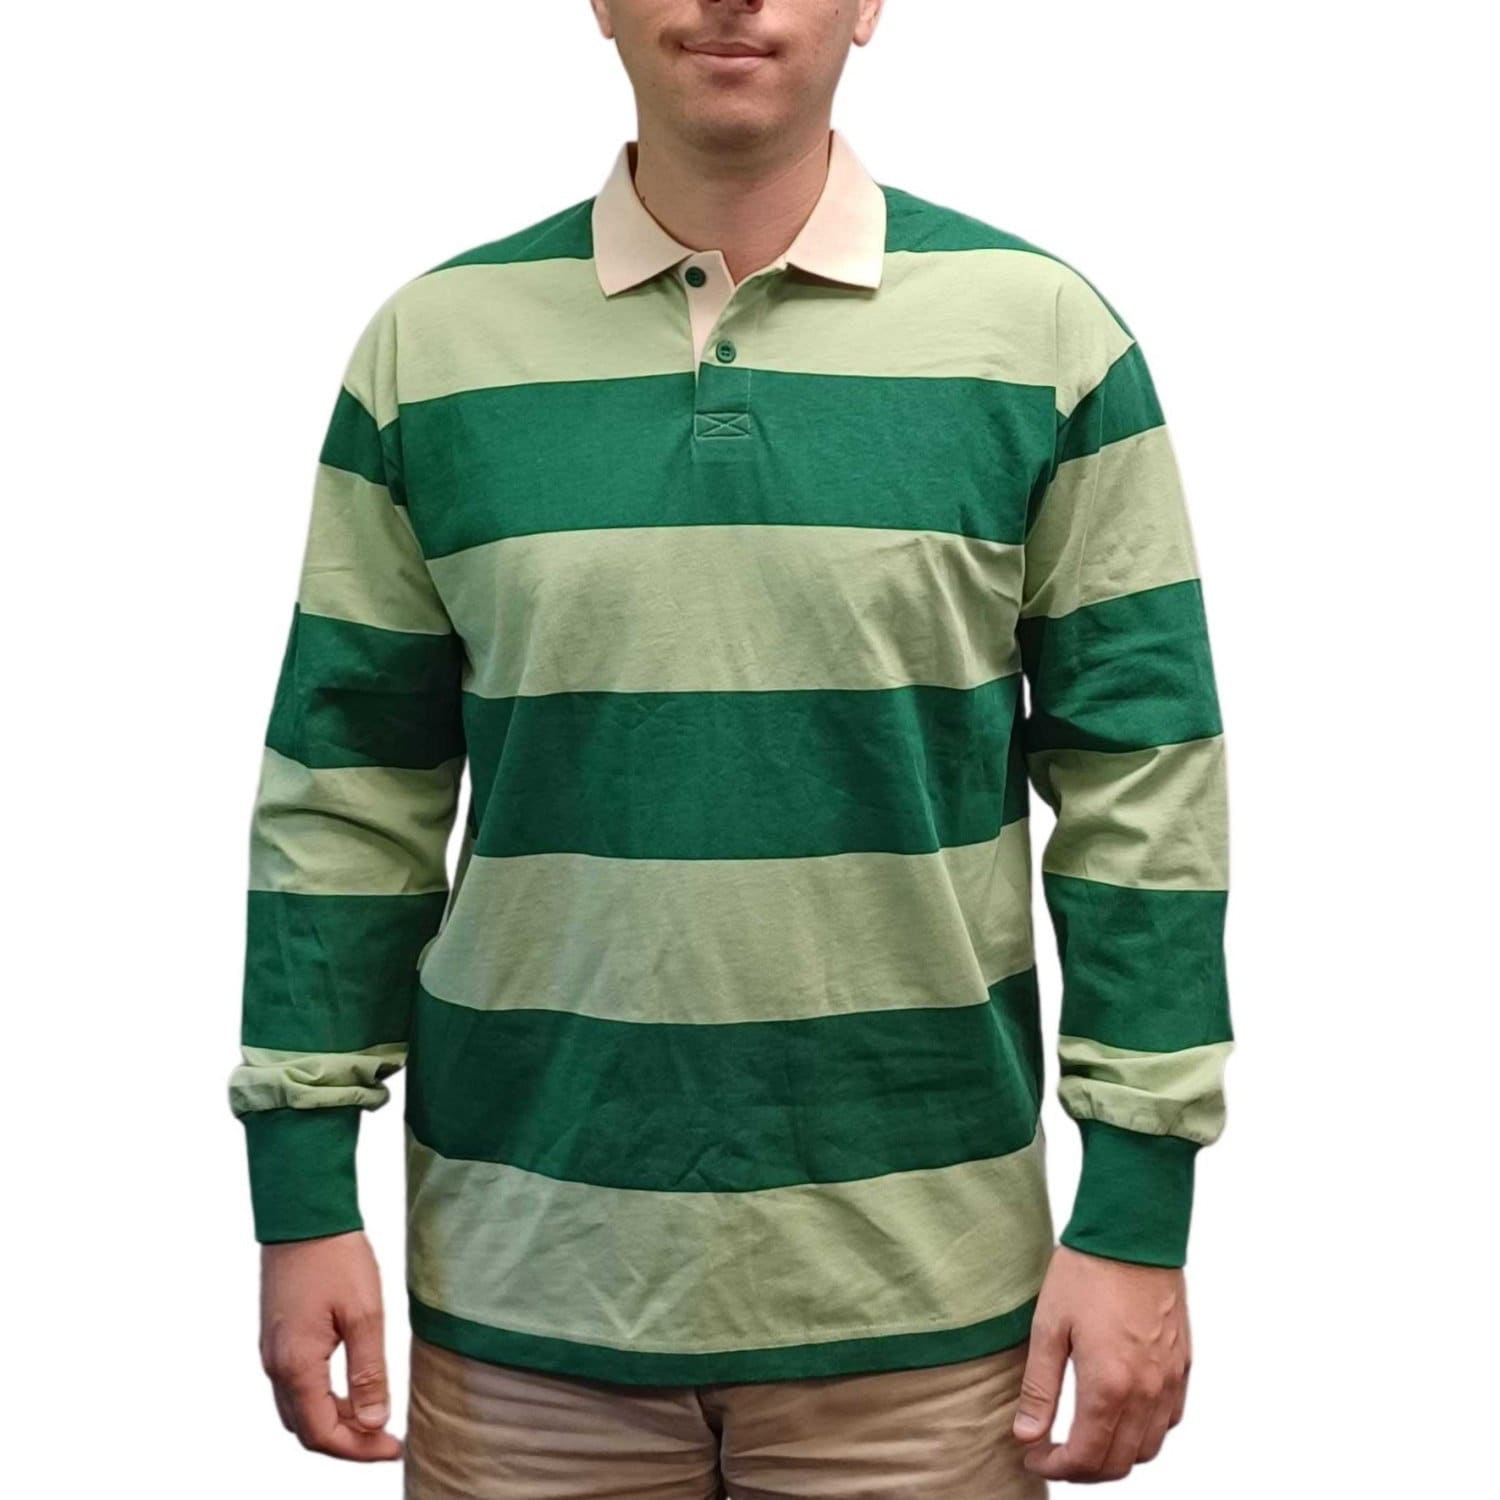 Striped Rugby Shirt - Etsy